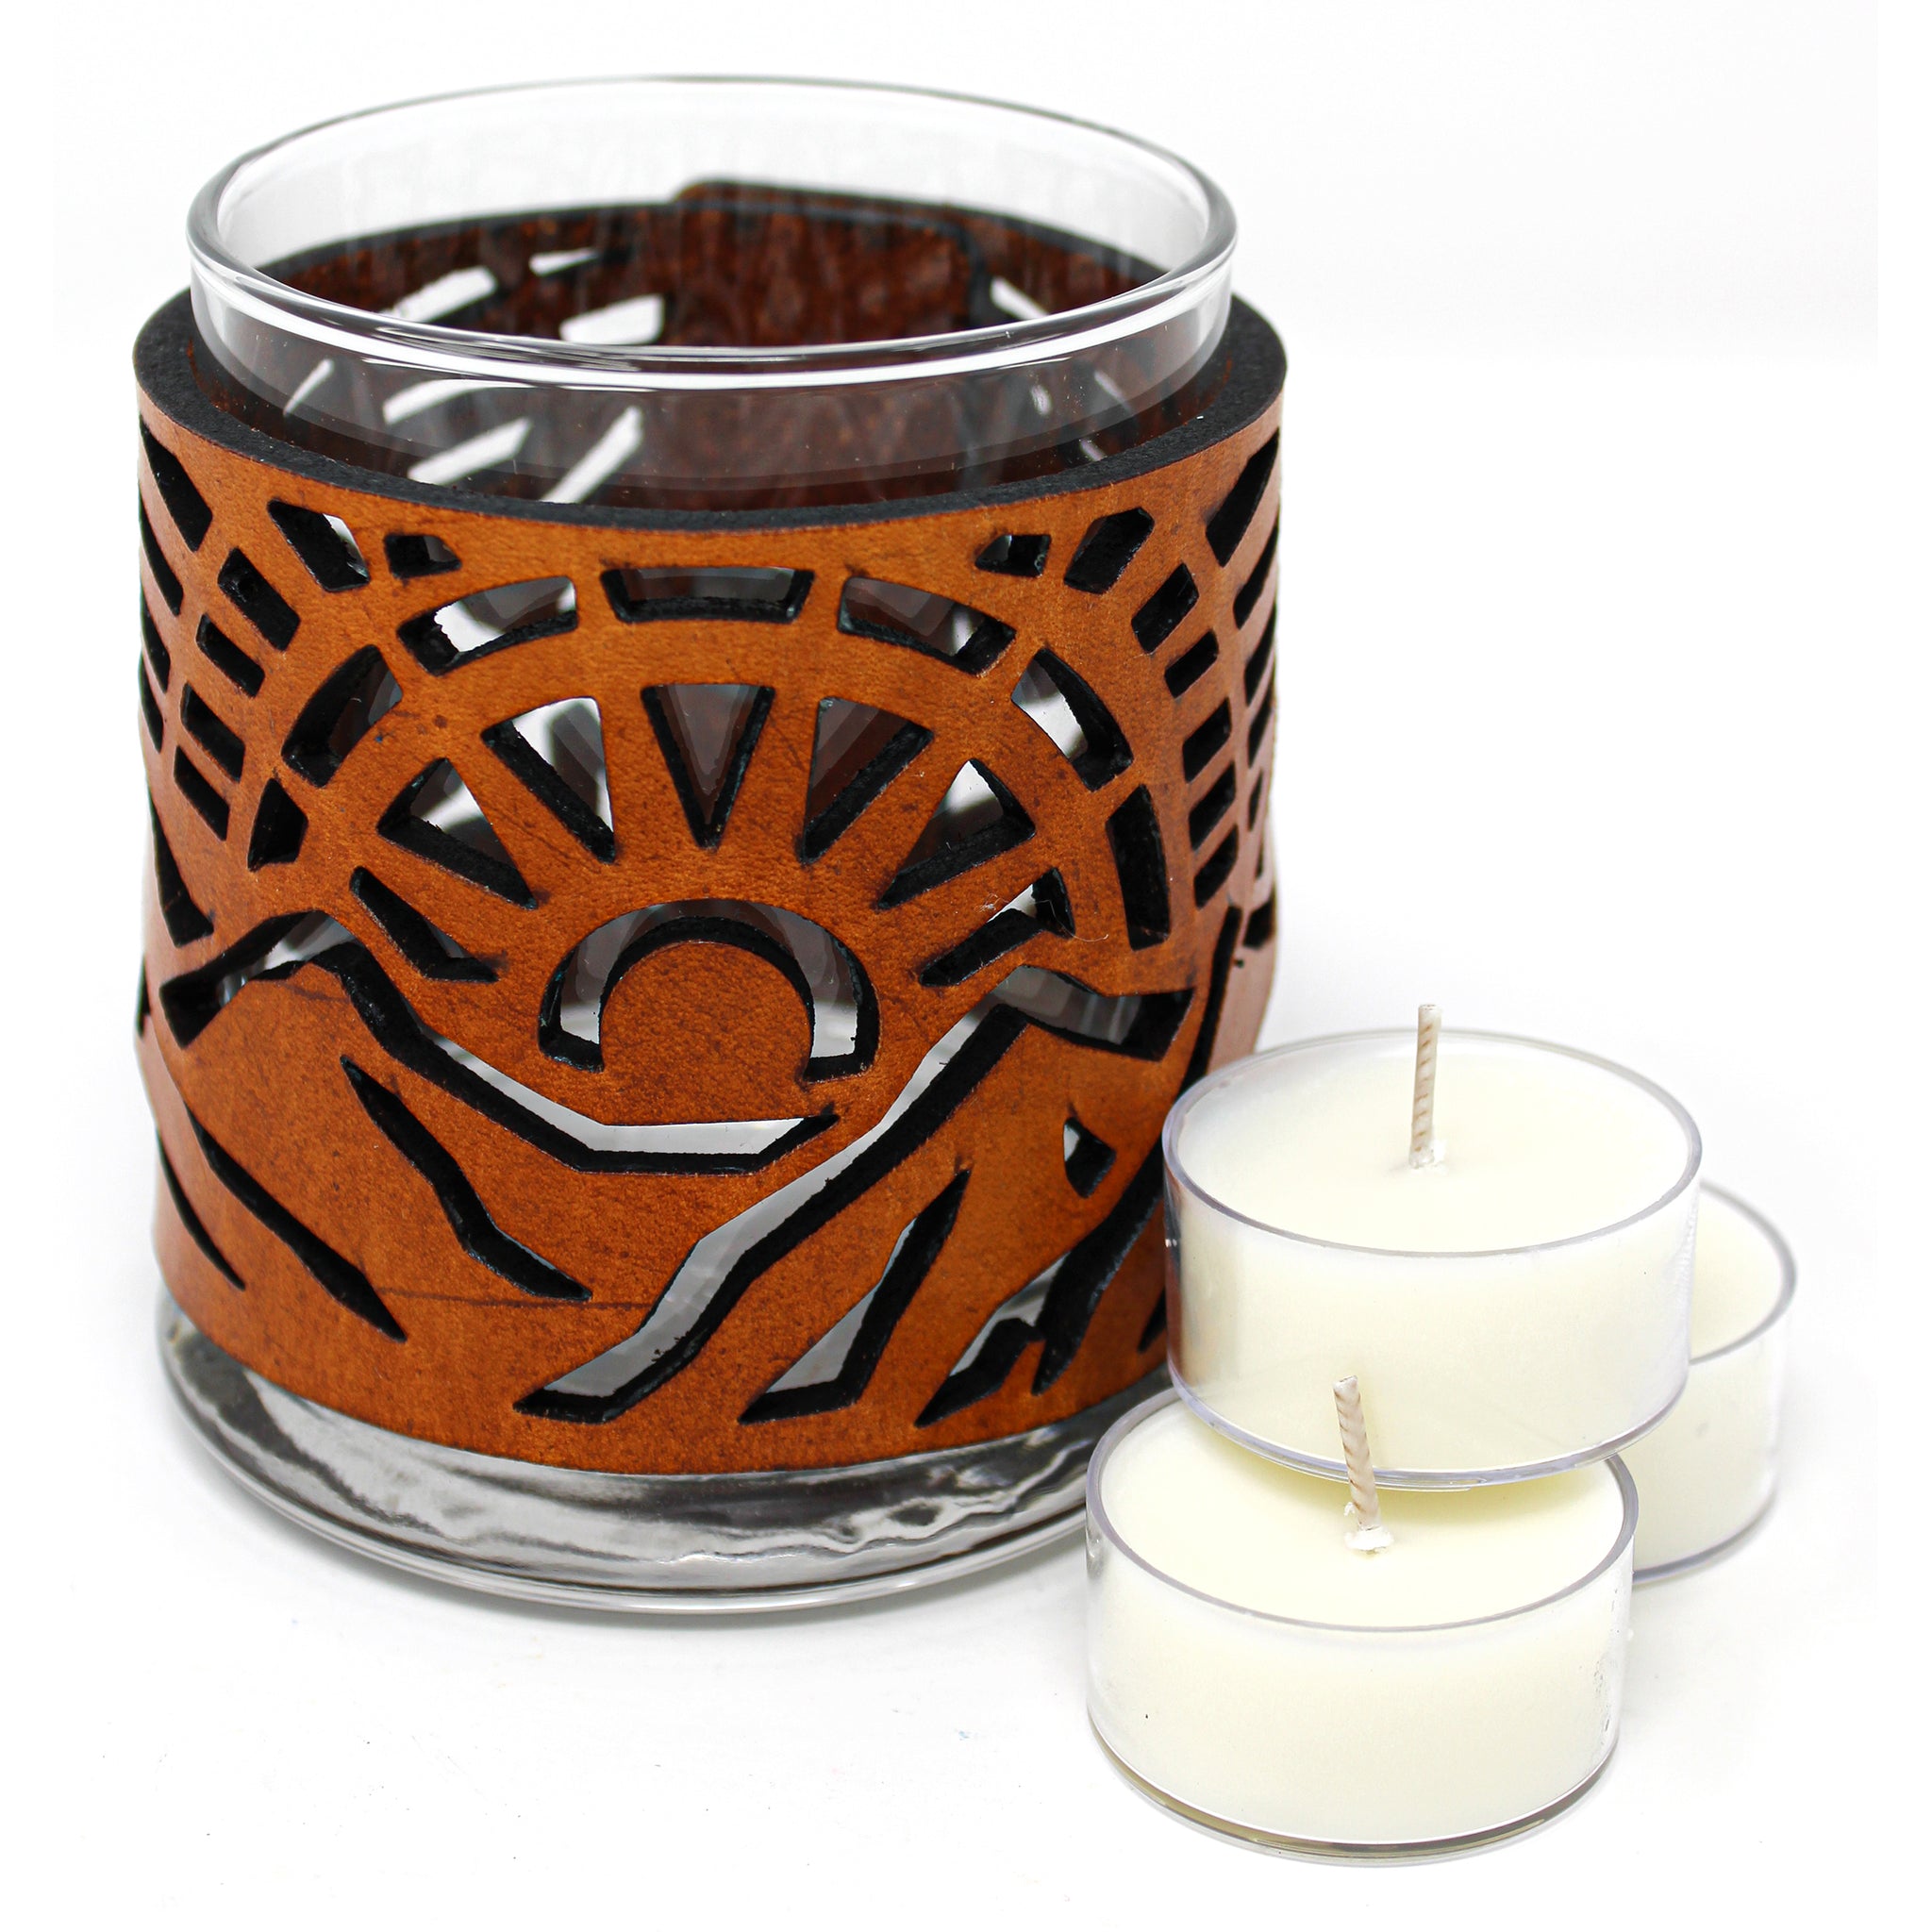 Candle Warmer – Sierra Mountain Candle Co